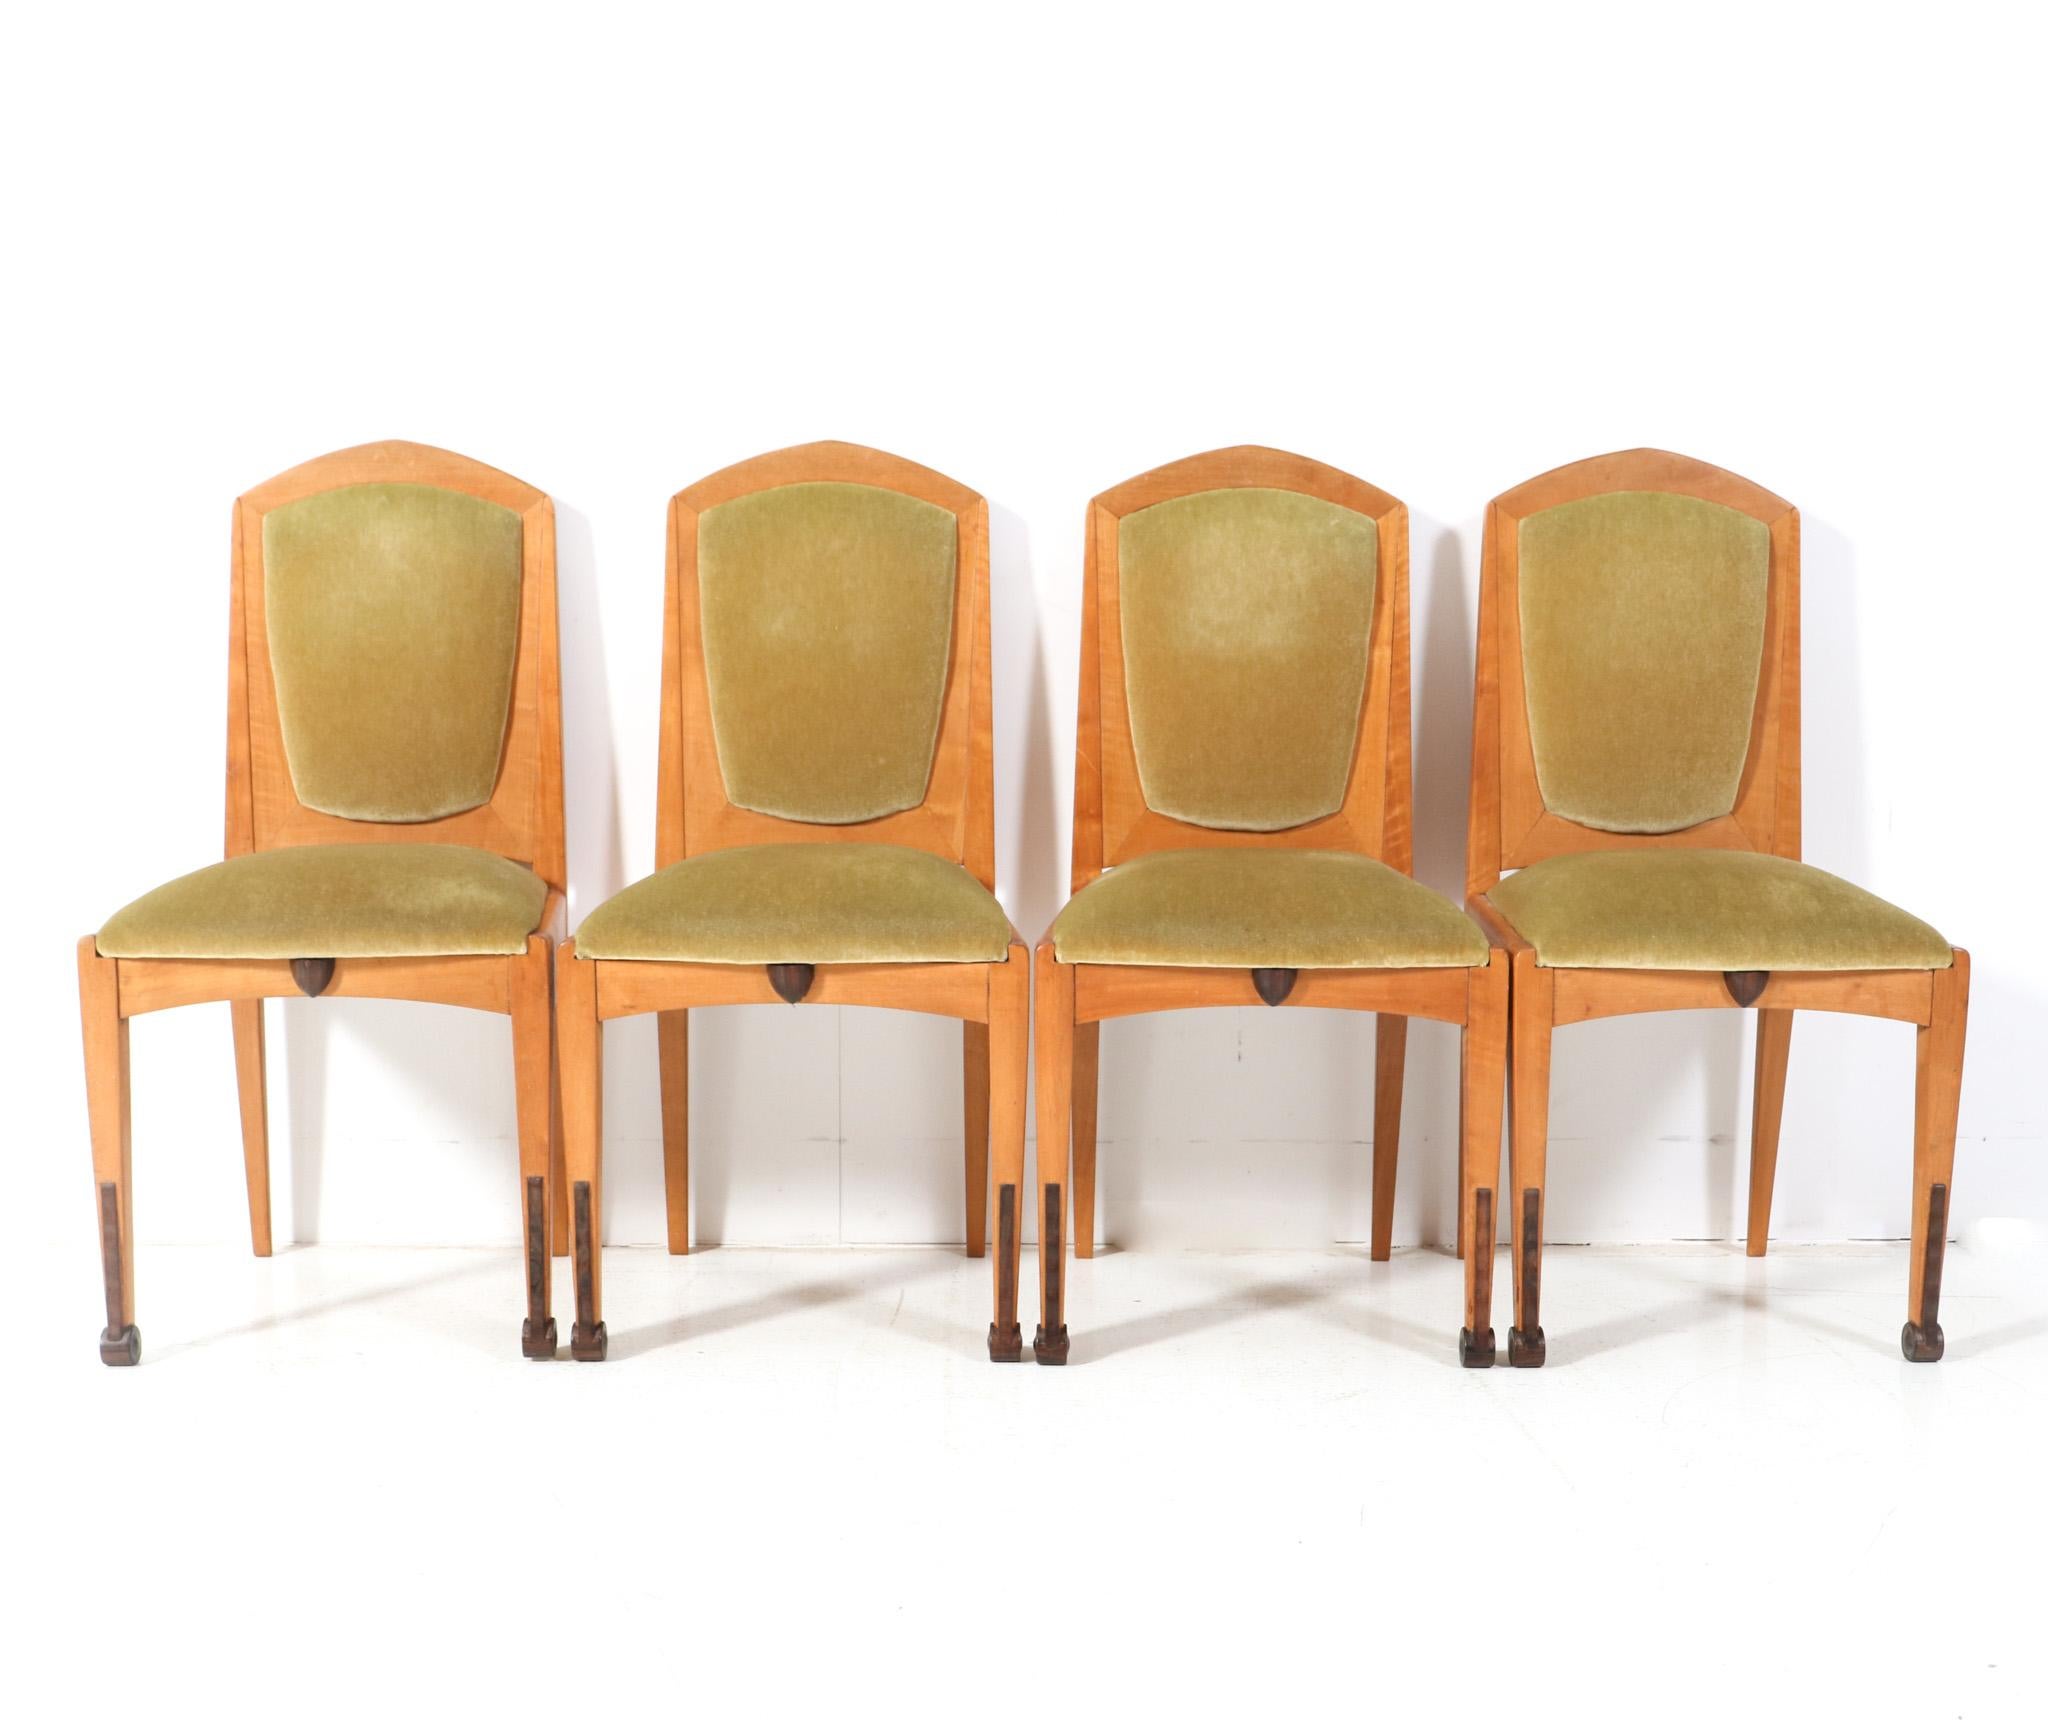 Set of Six Art Deco Amsterdamse School Dining Room Chairs by J.J. Zijfers, 1920s For Sale 5